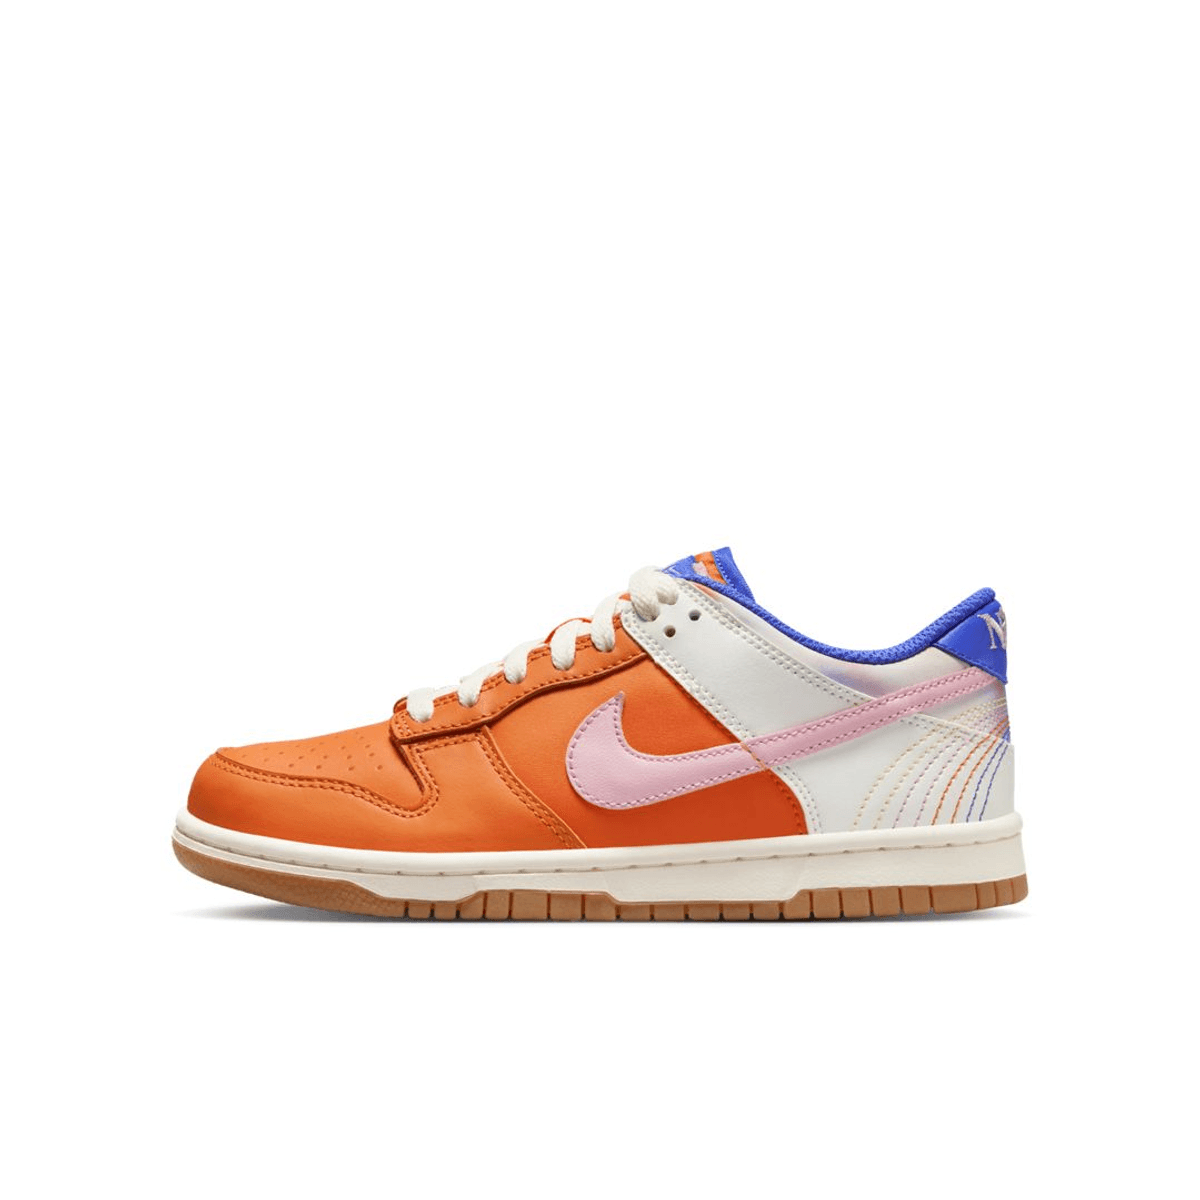 The Nike Dunk Low Gets The "Everything You Need" Treatment